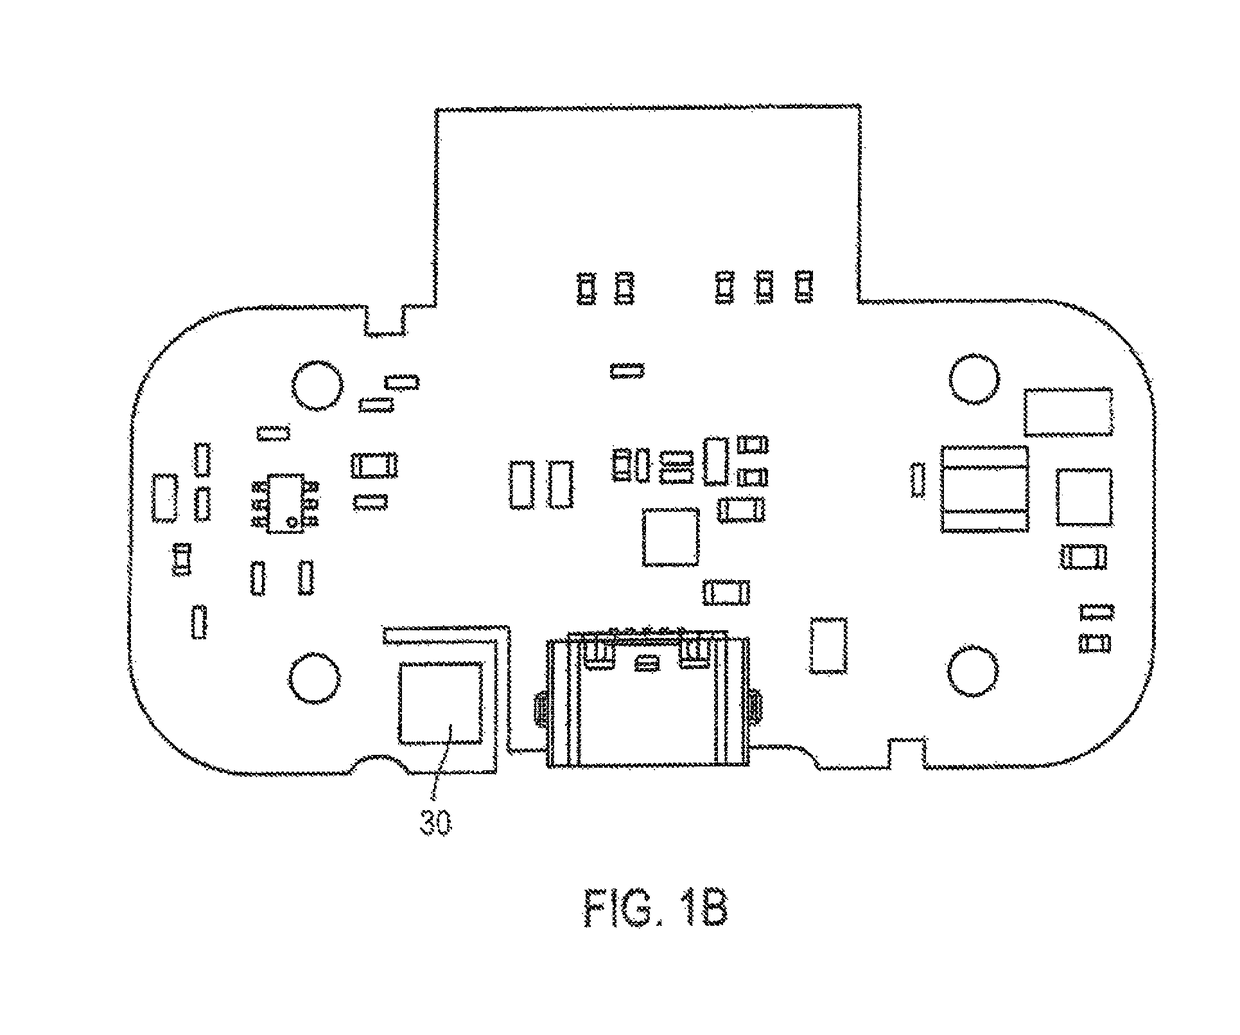 Monitoring device and cognitive behavior therapy